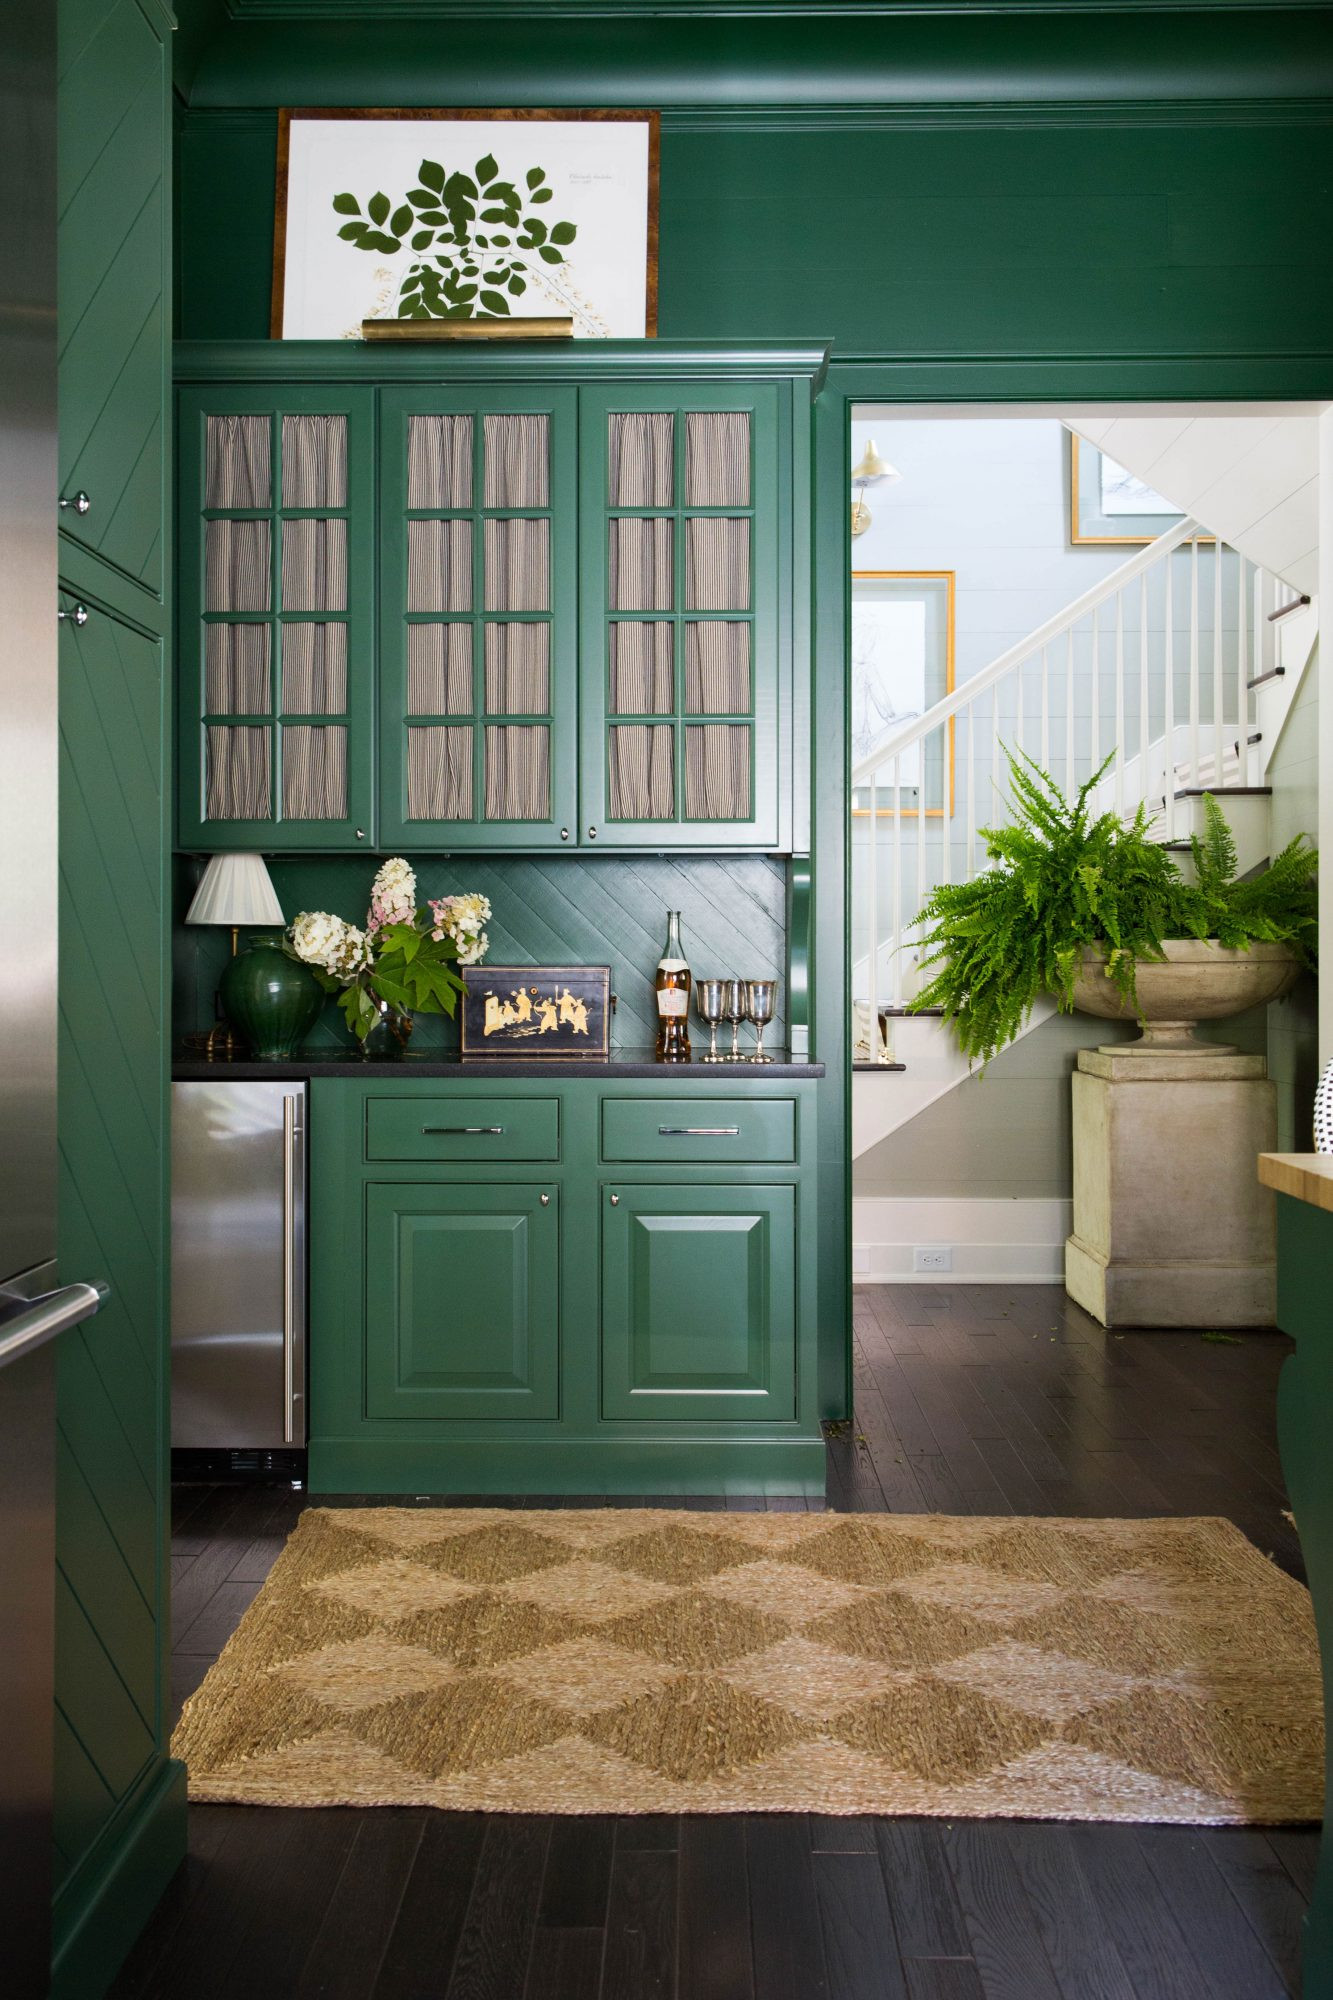 Green Kitchen Walls
 Painting Kitchen Walls Cabinets the Same Color Emily A